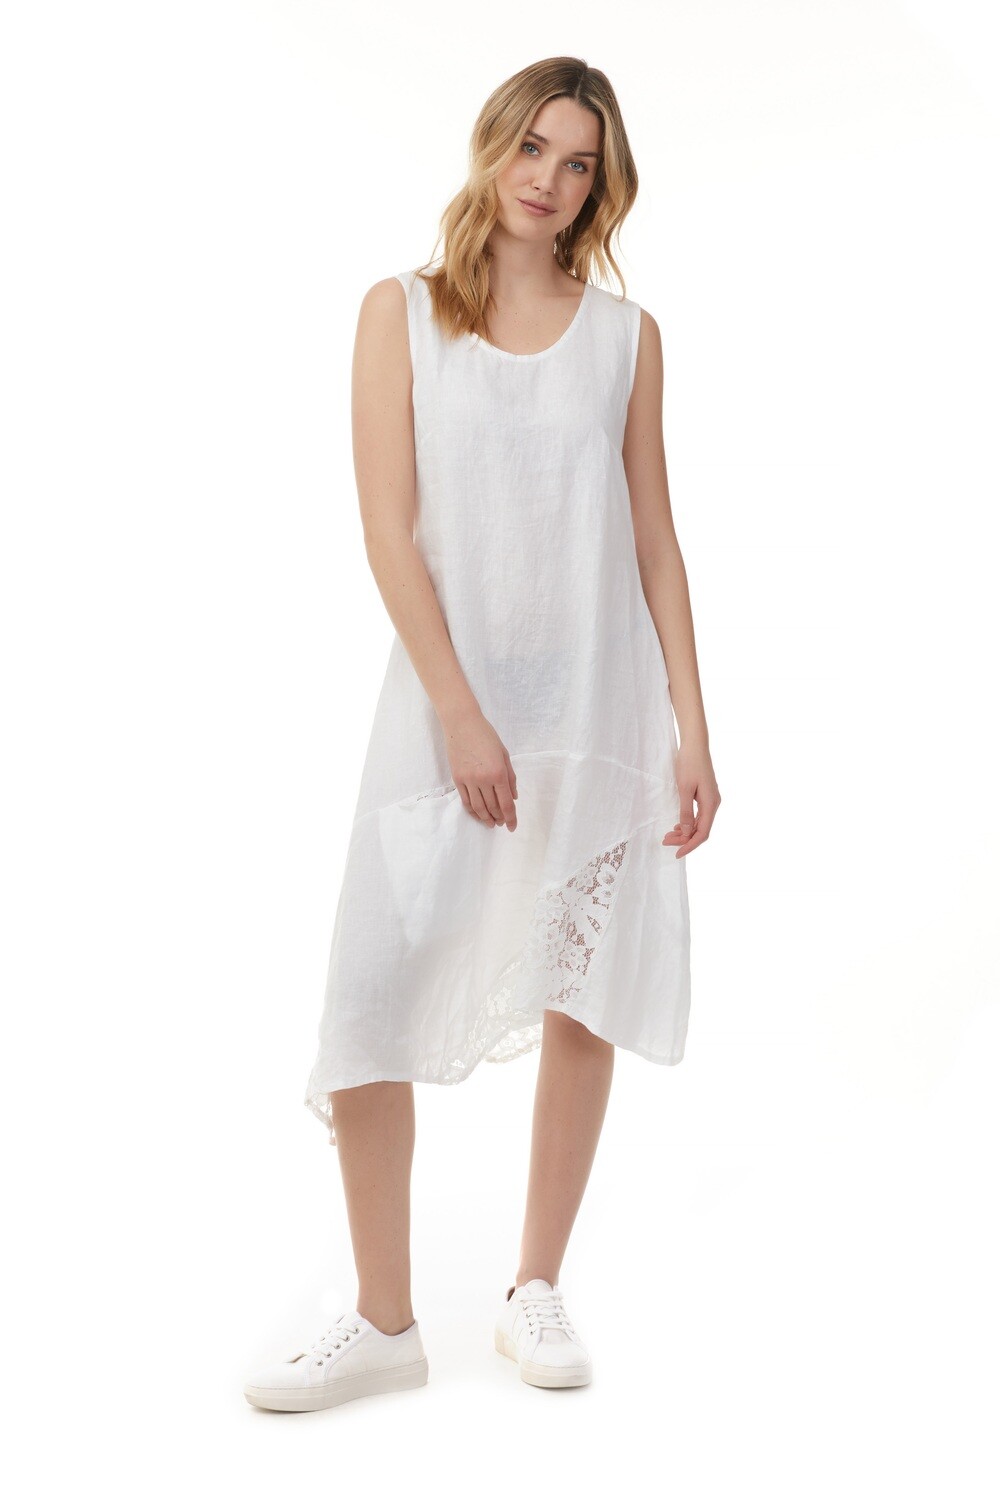 Charlie B Asymmetrical with Lace Insert Dress 